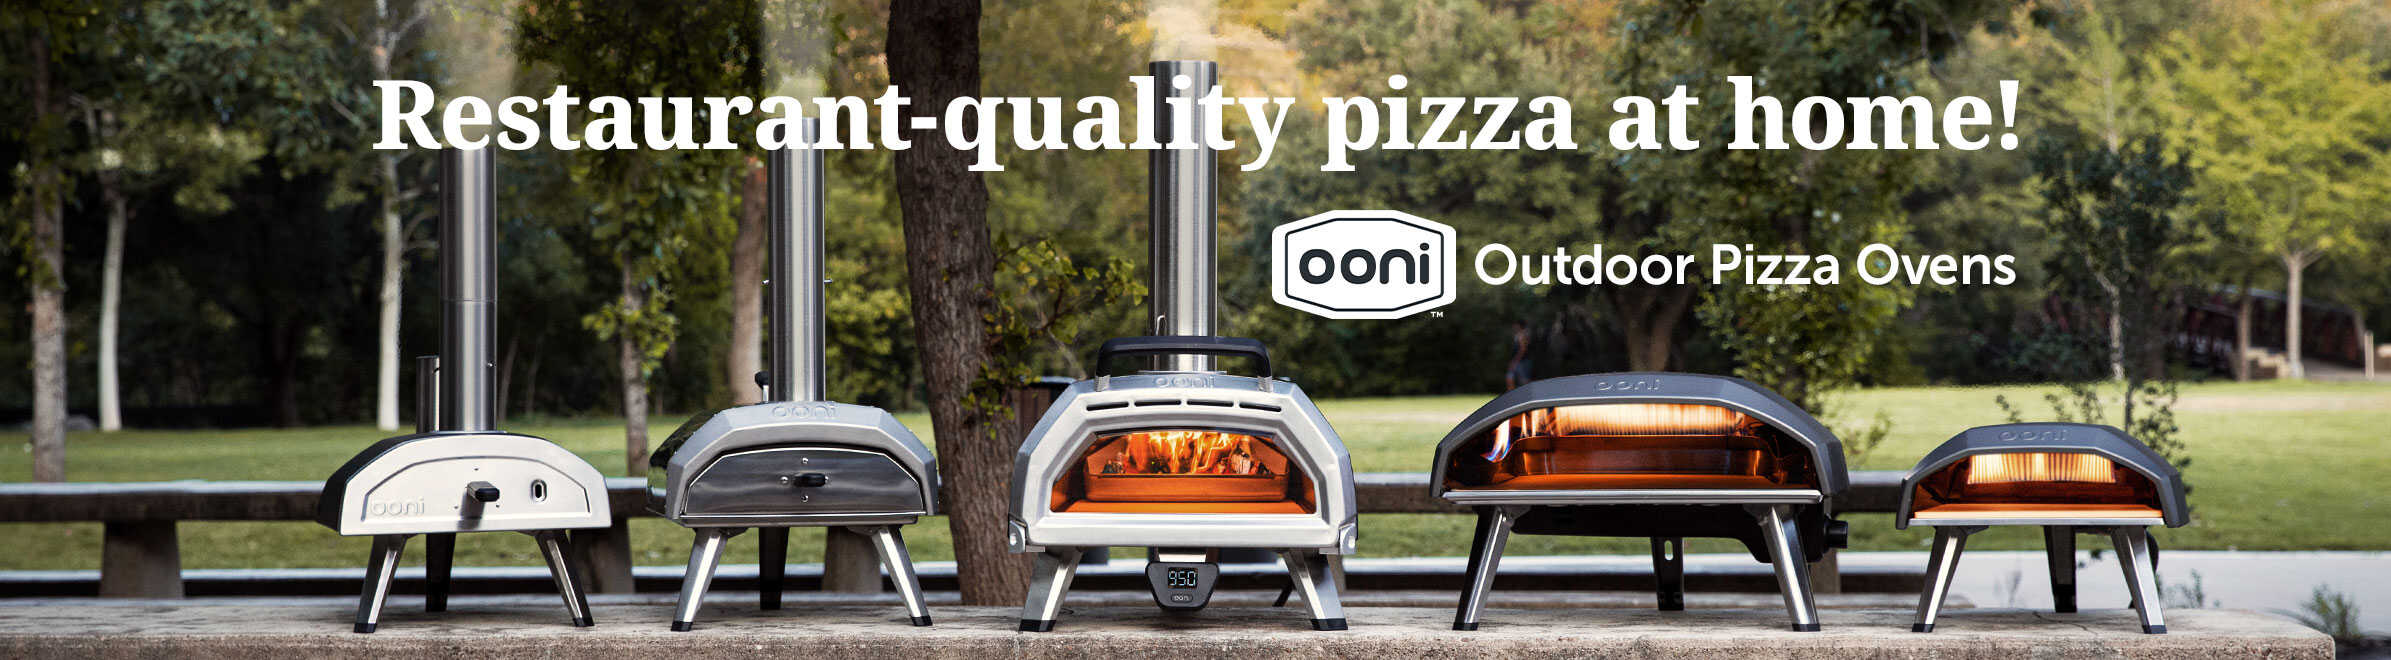 Ooni Outdoor Pizza Ovens